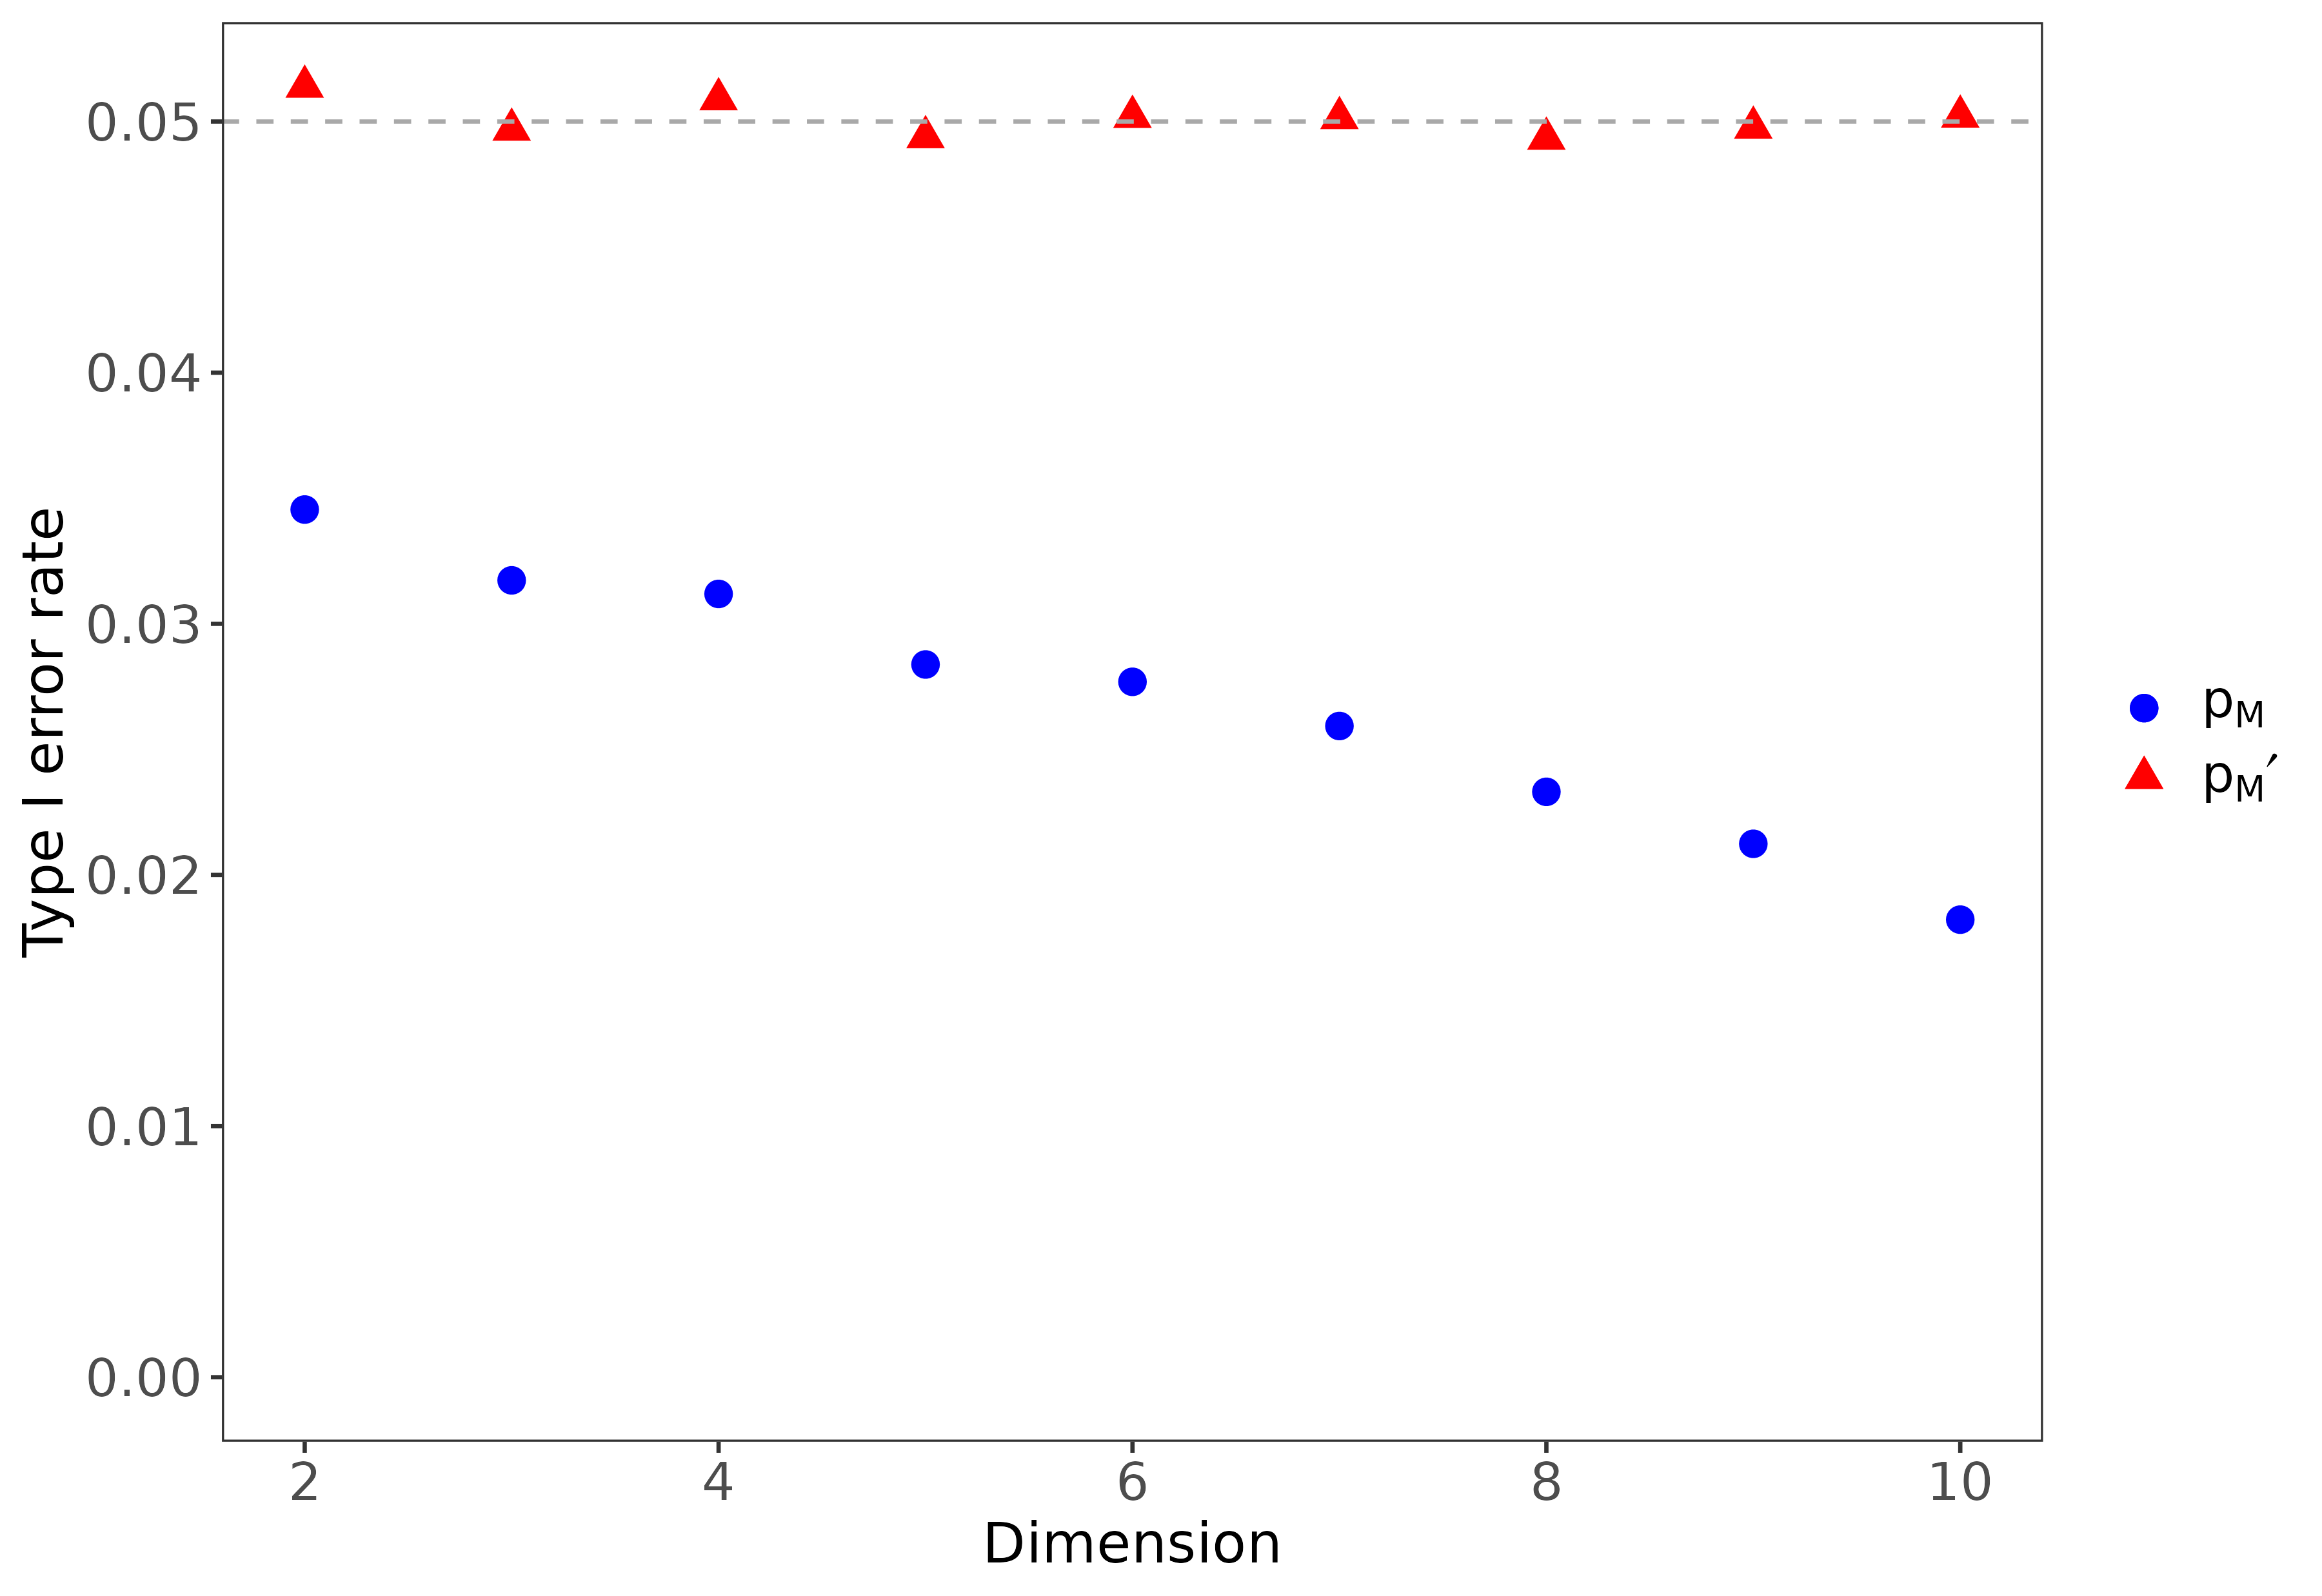 Figure 3: Type I error rate of the test using p_{M} and p_{M}' as dimension increases. Samples are both of size 10 and are drawn from standard multivariate normal distributions of the specified dimension. The number of permutations used is 100, and the error rate is estimated using 10^{5} replications.